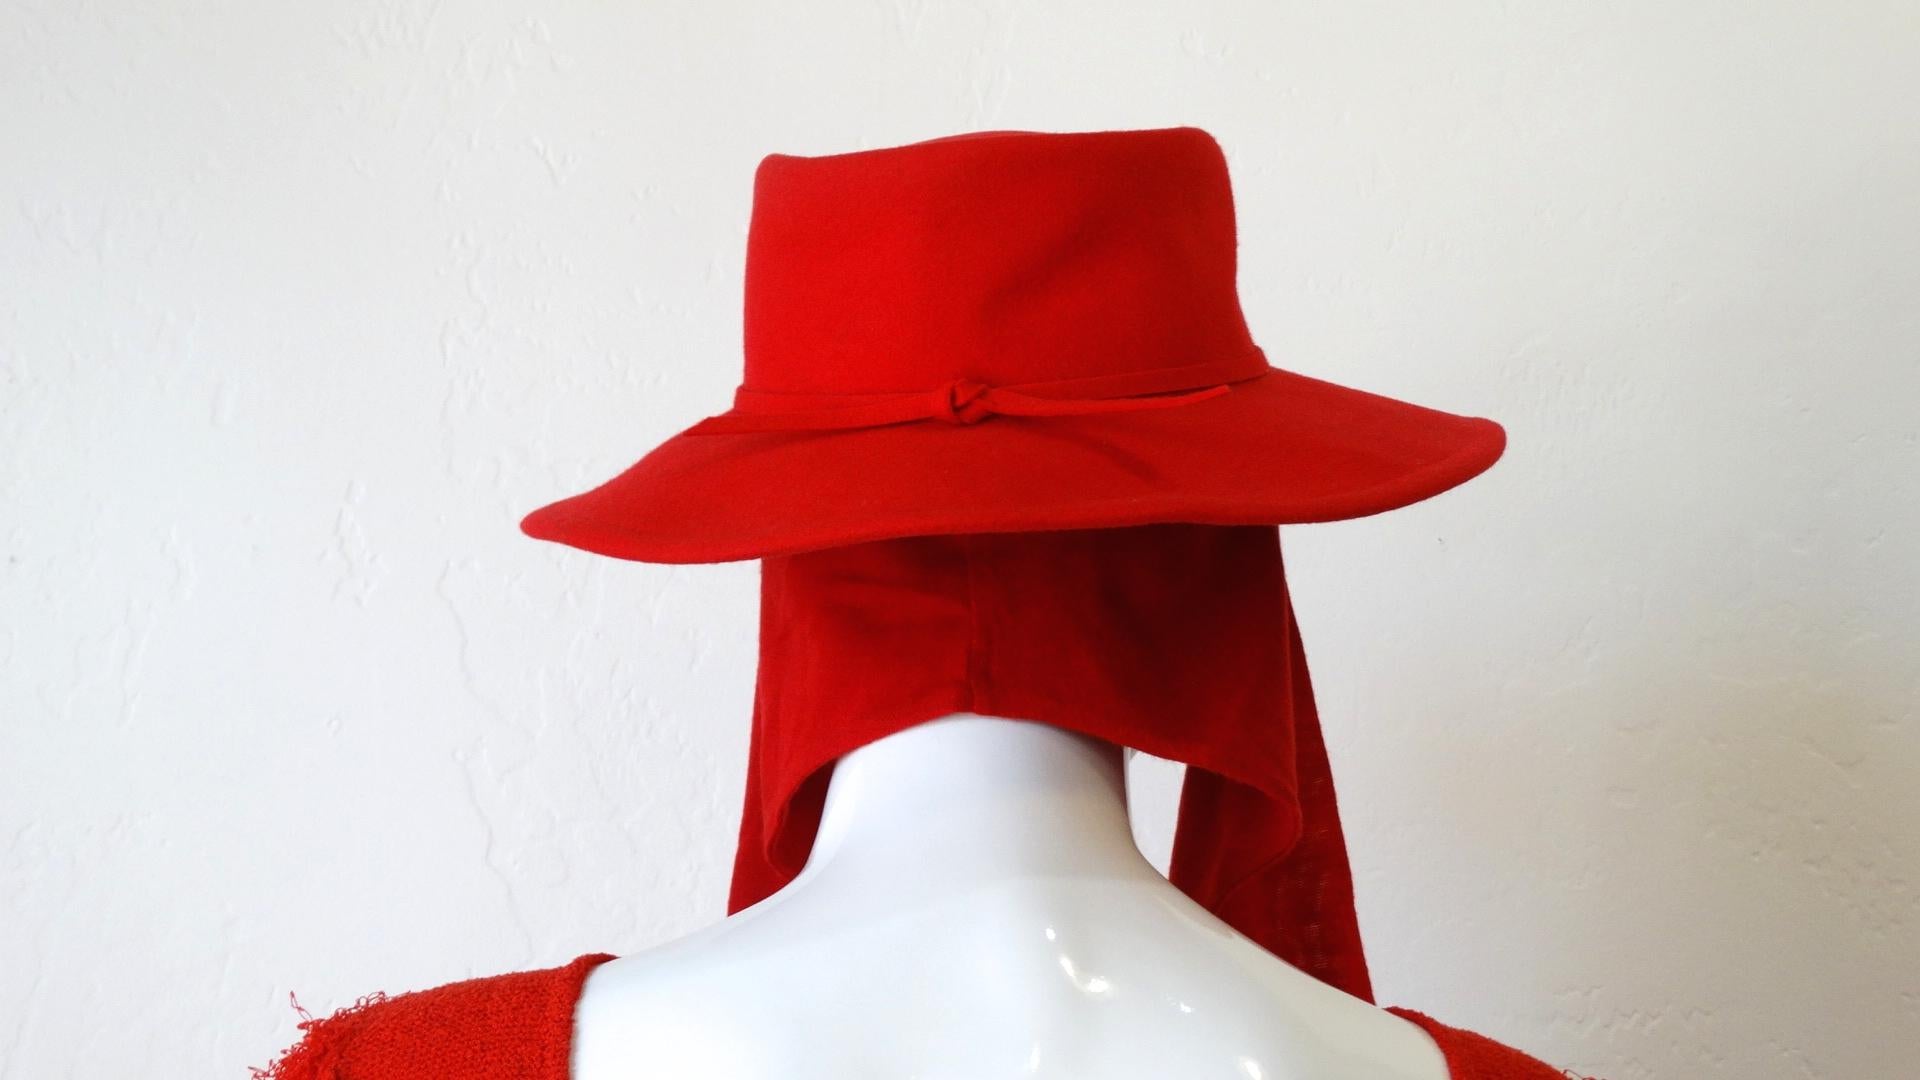 You Need This Hat In Your Wardrobe! Circa 1980s, this Betmar red boater hat is 100% Wool, and features a tonal band and a  built in head-wrap for the perfect design detail. The perfect chic hat to add a pop of color! Made in the US
**Scarf is 100%